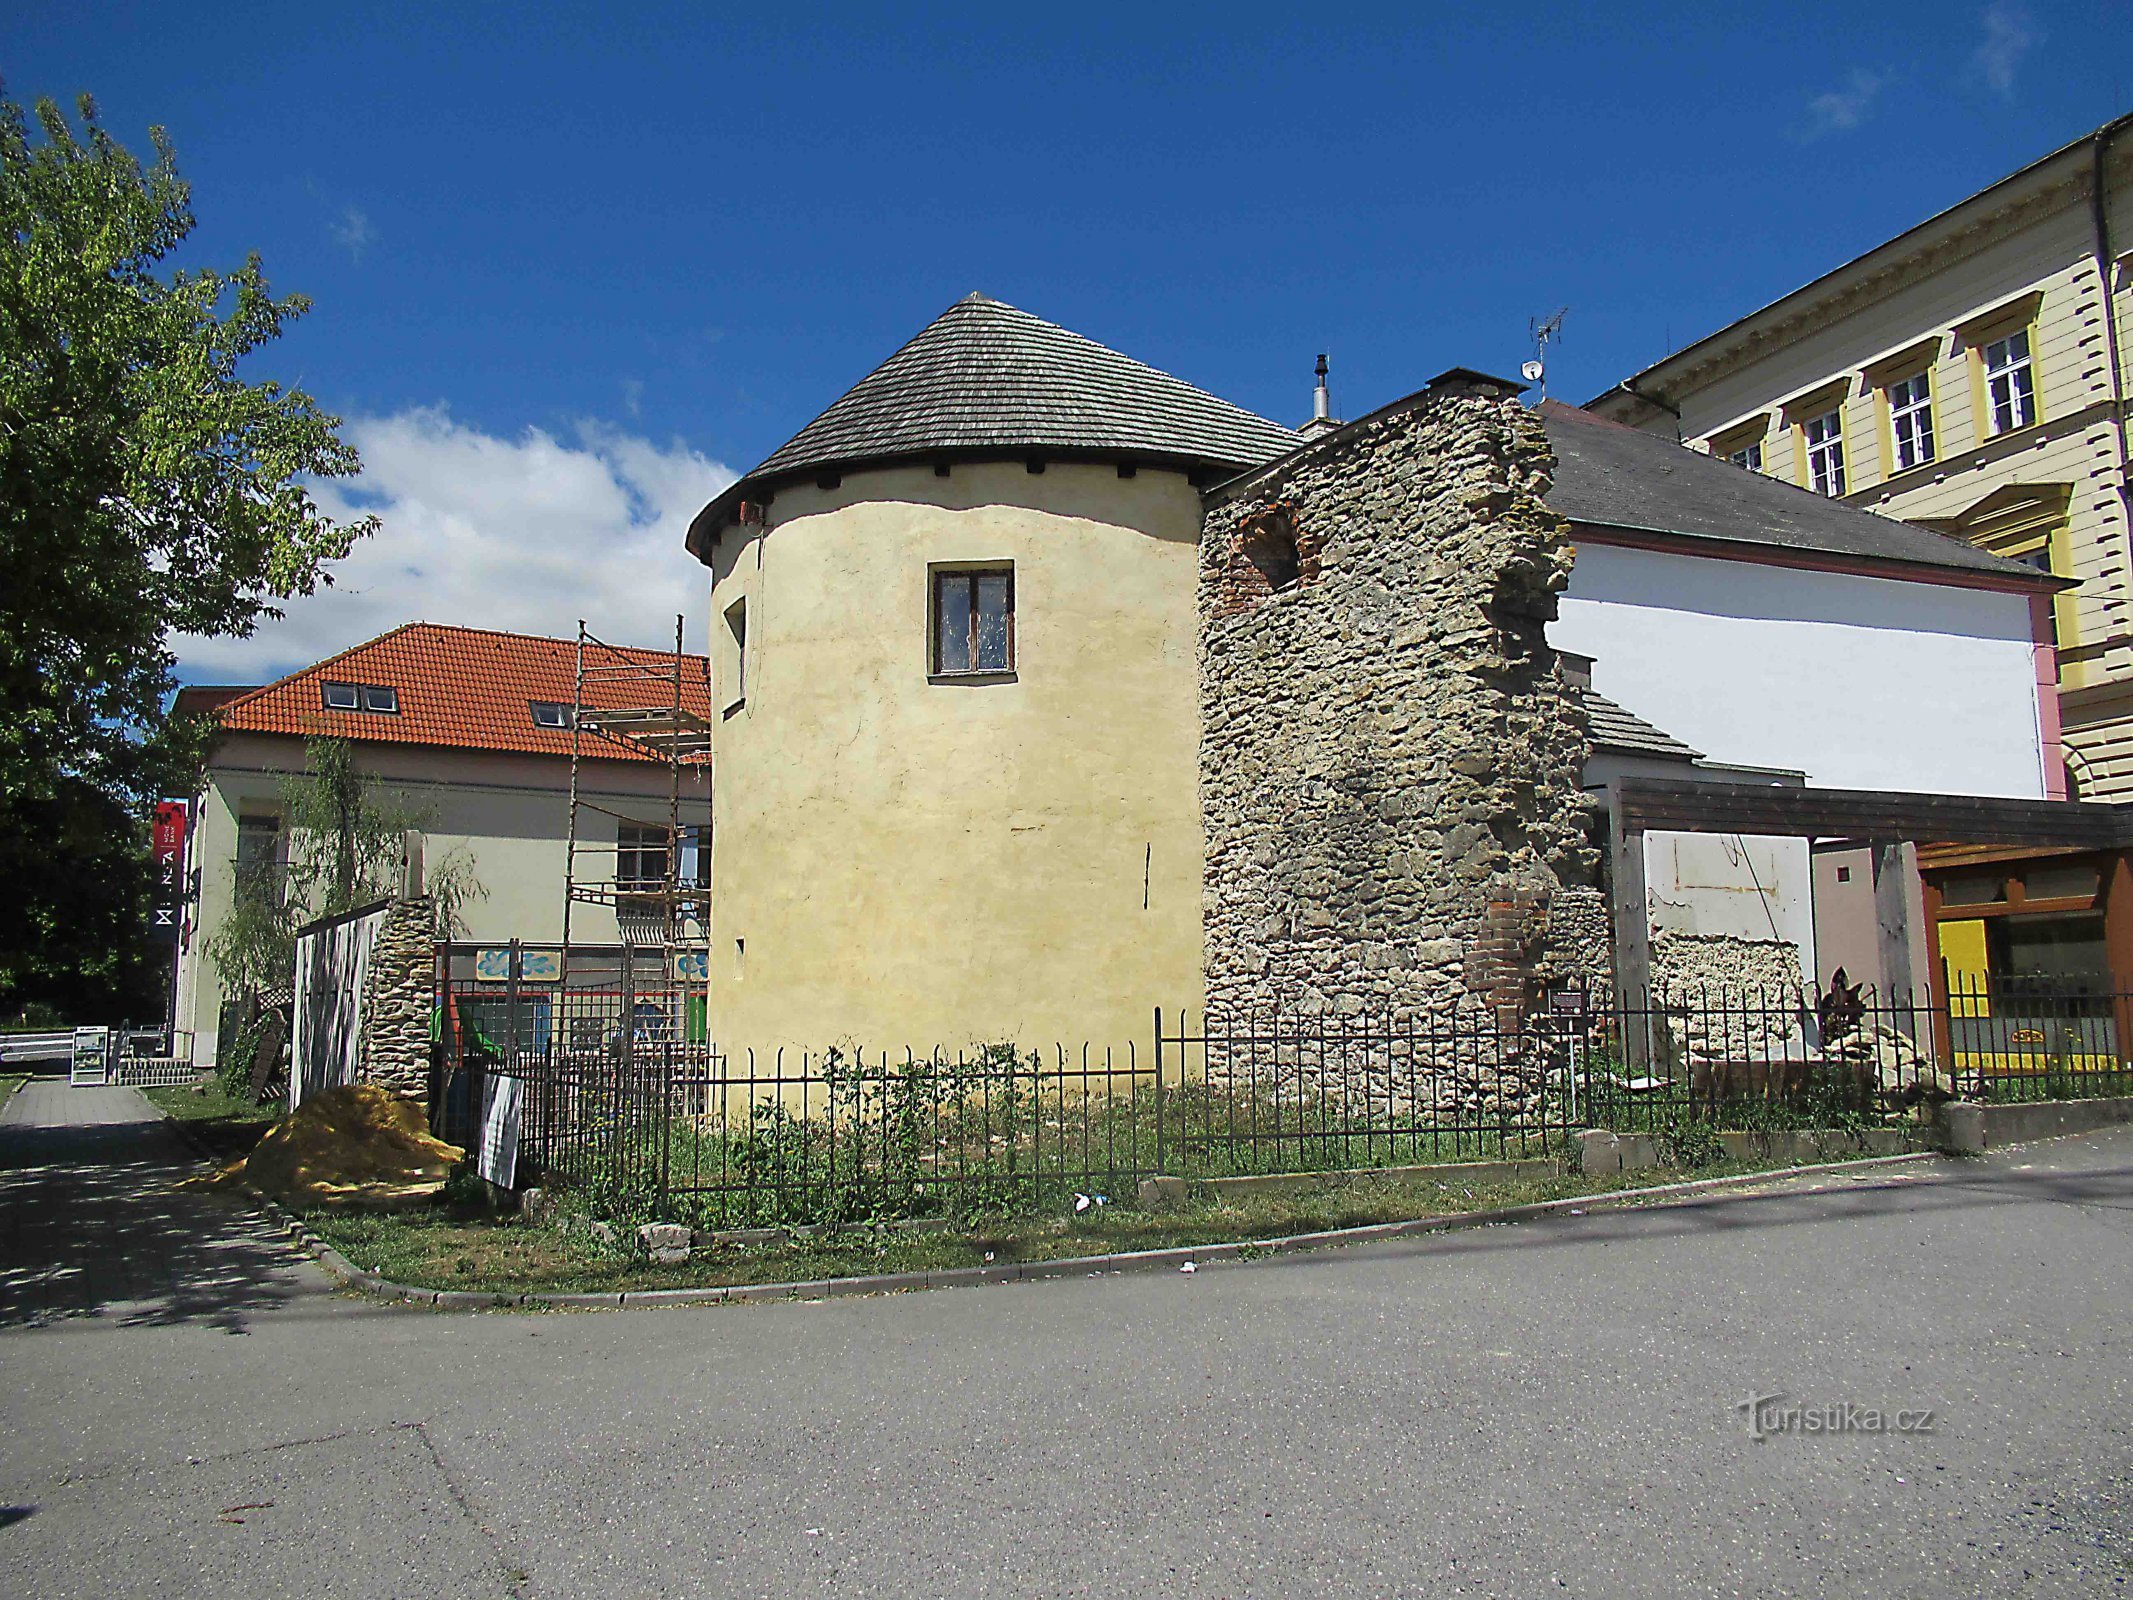 The remains of the city fortifications in Svitavy